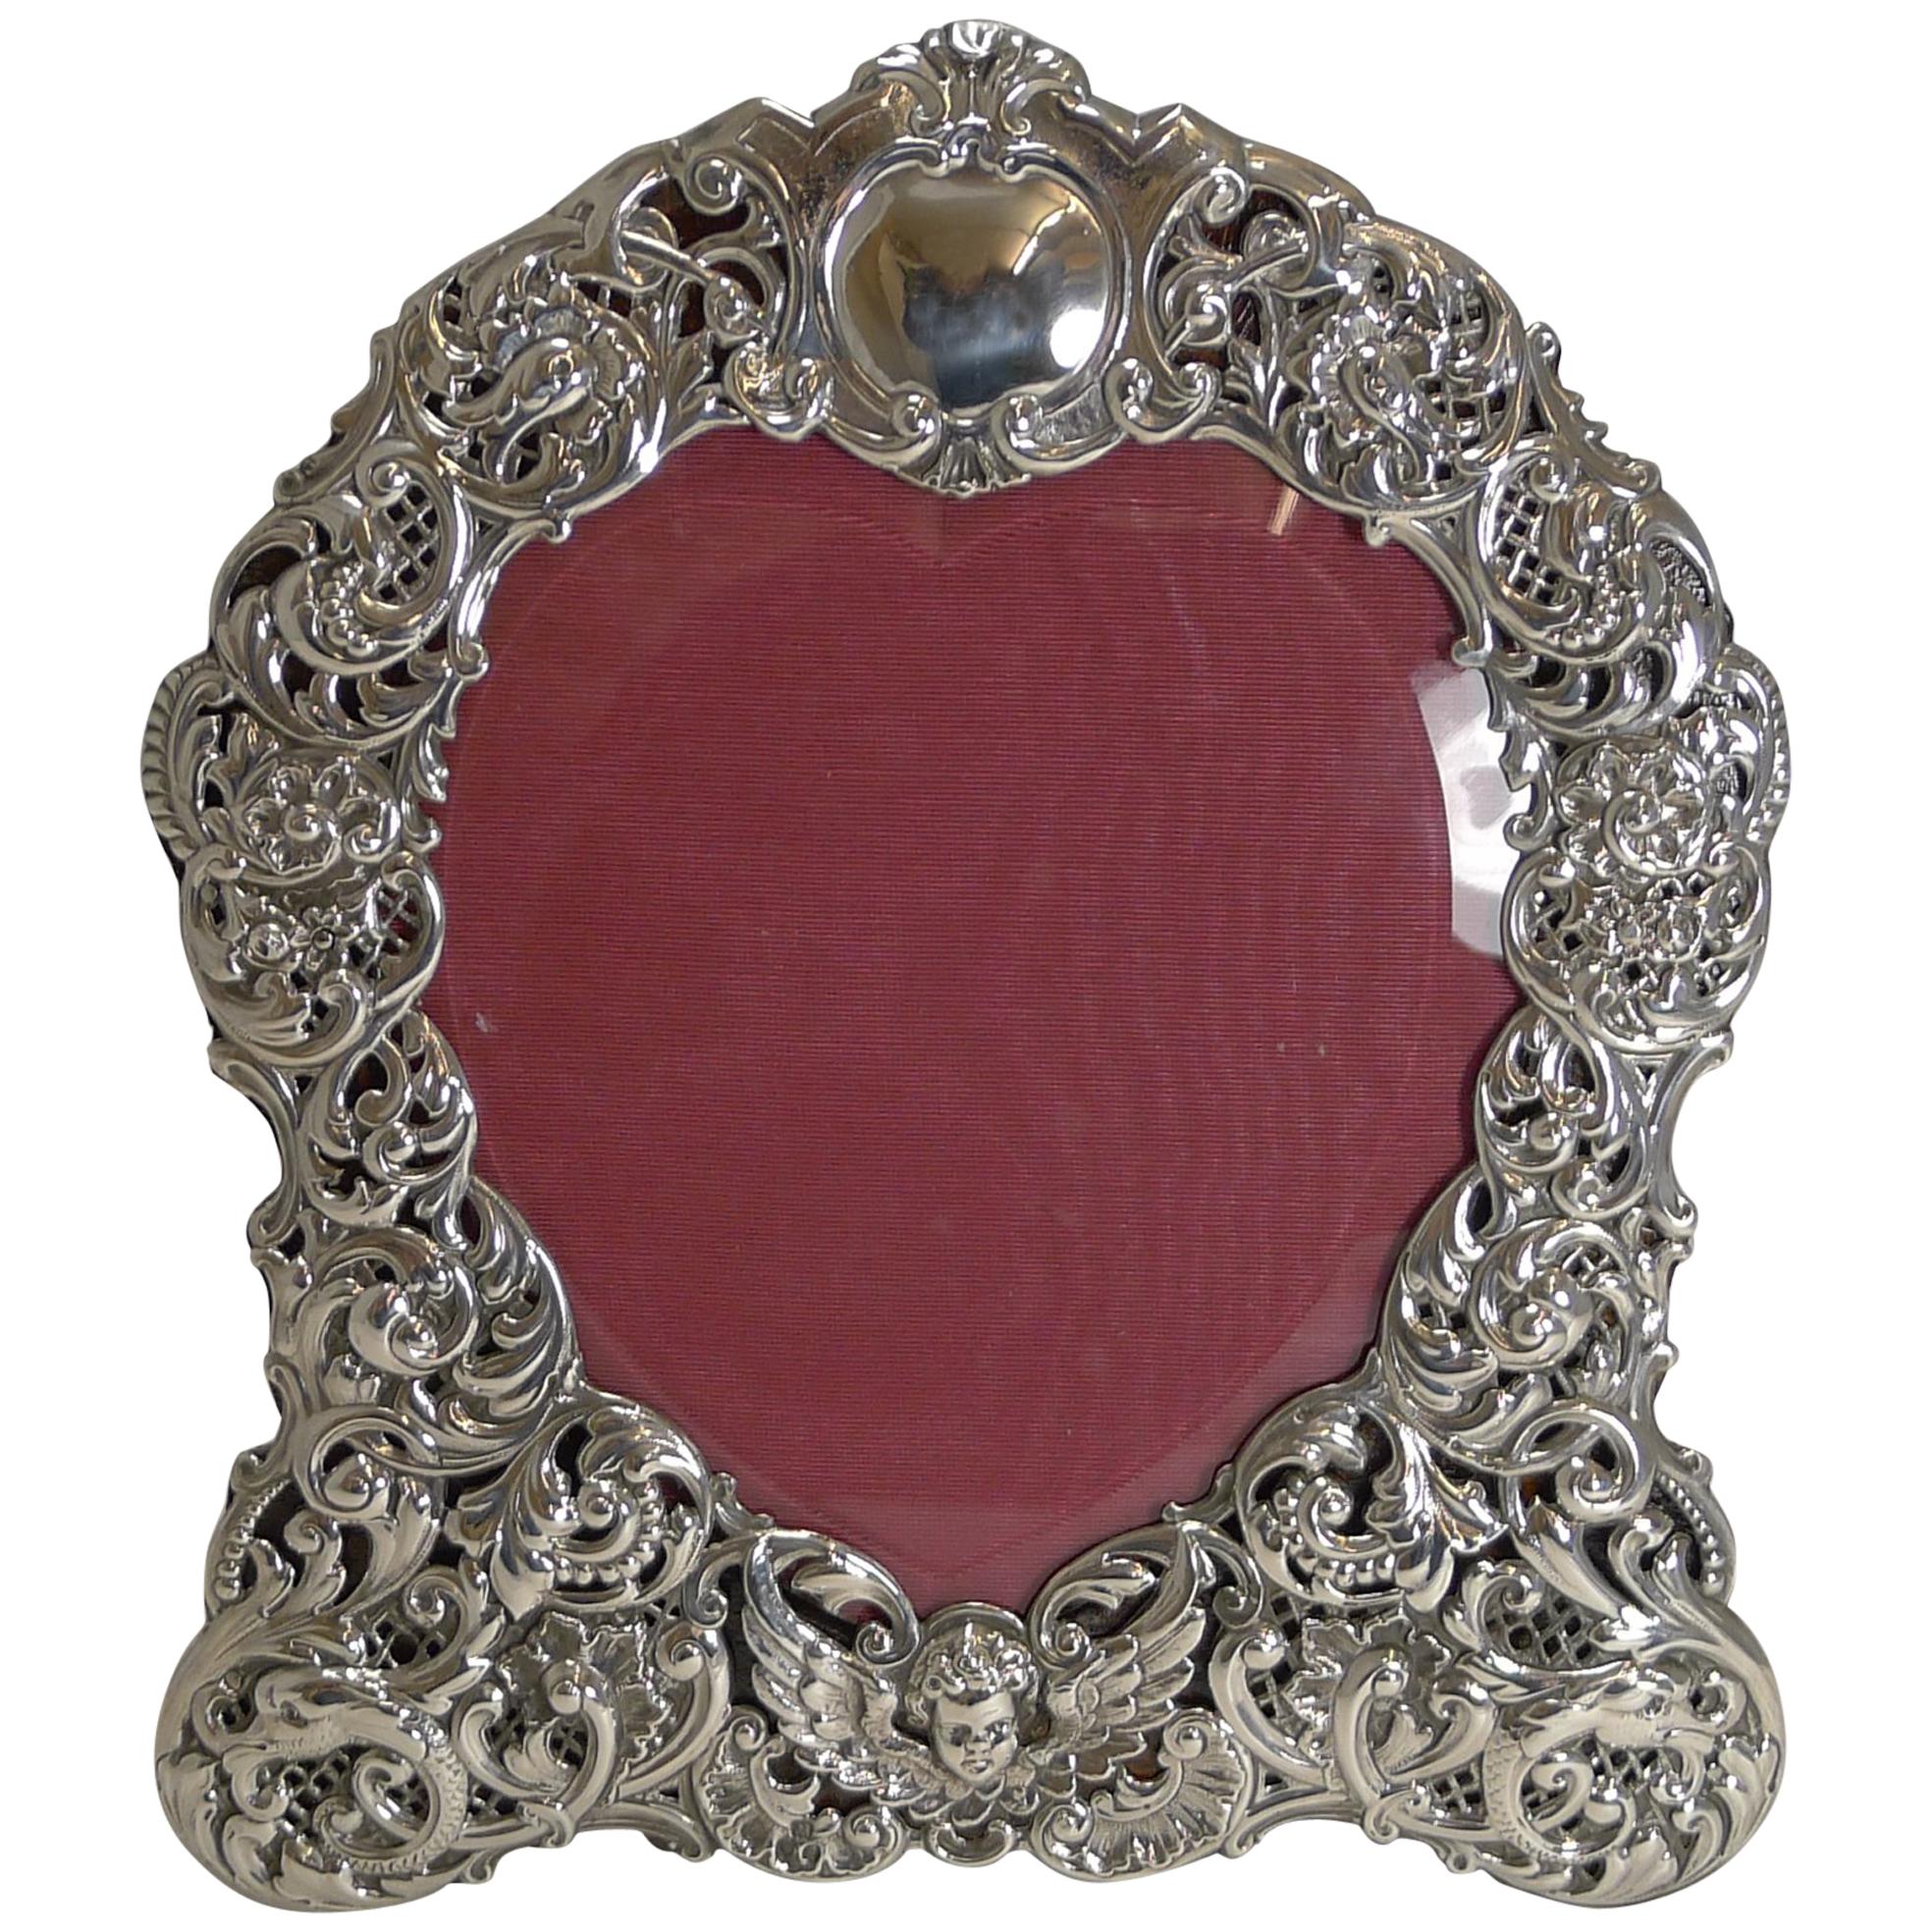 Large Antique English Sterling Silver Photograph/Picture Frame - Heart - 1898